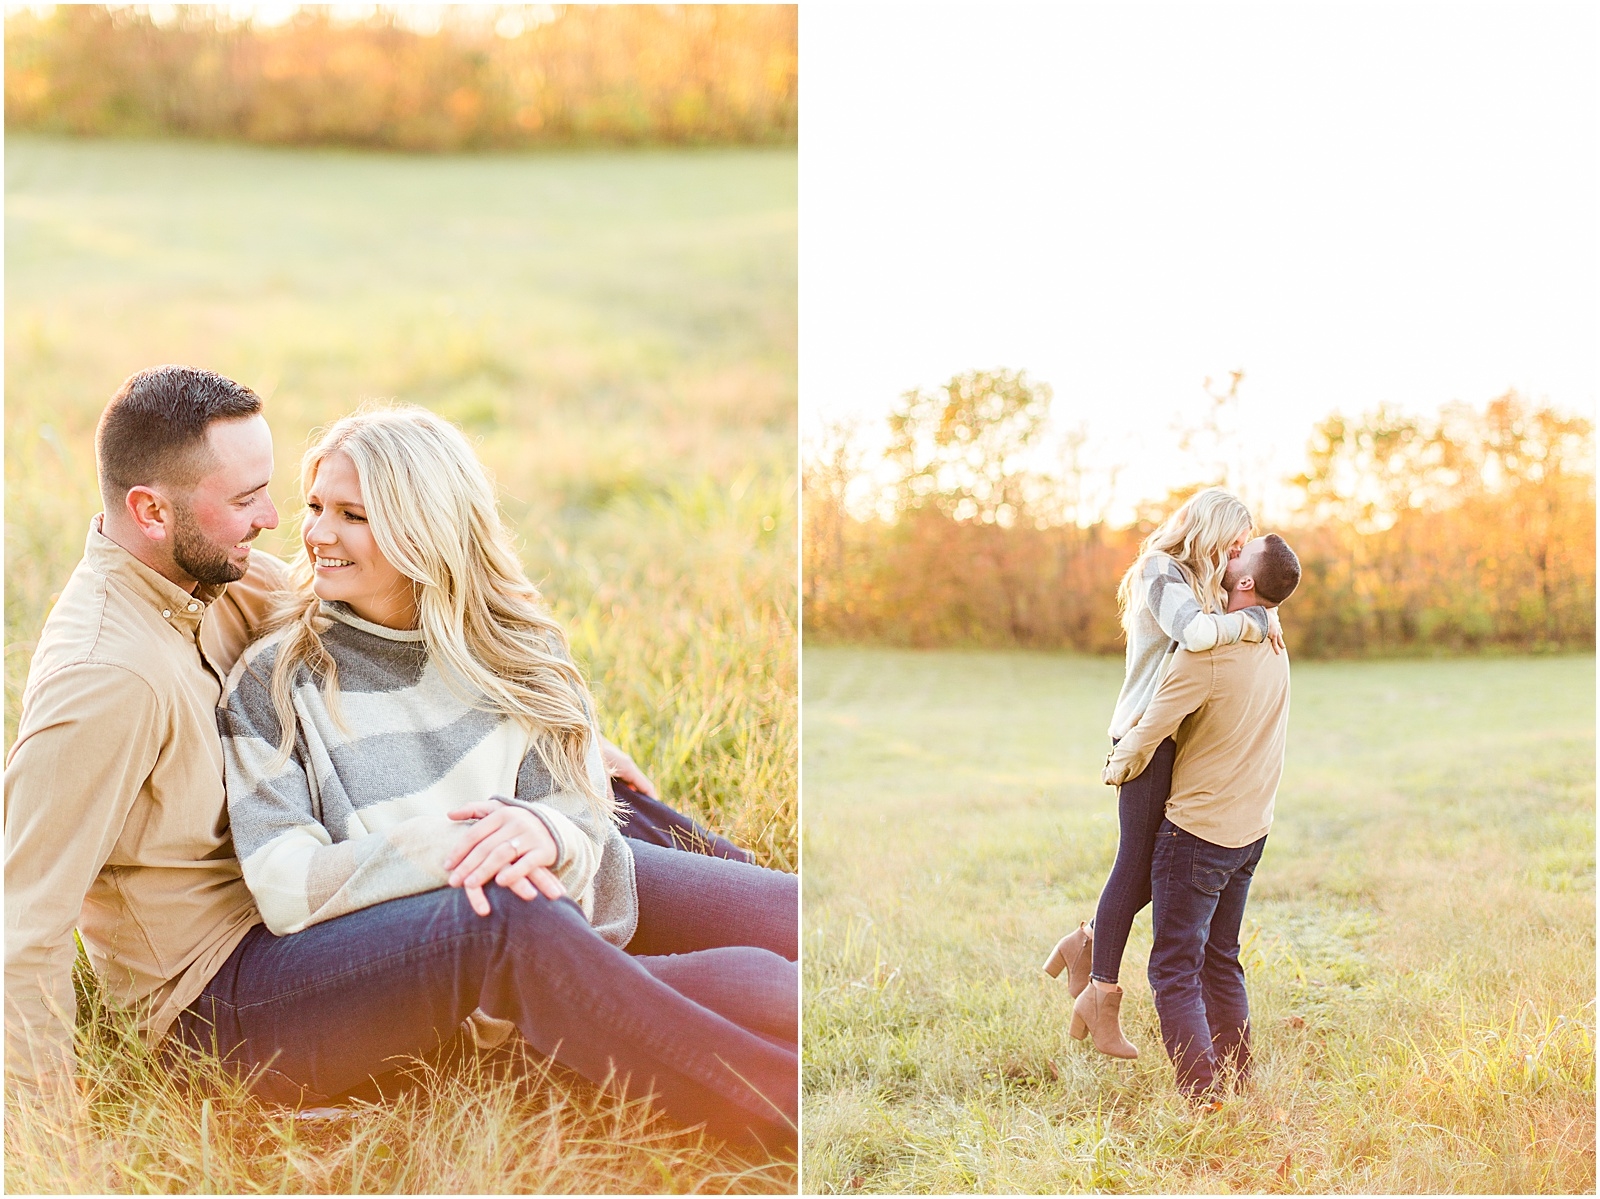 A Southern Indiana Engagement Session | Charleston and Erin | Bret and Brandie Photography040.jpg